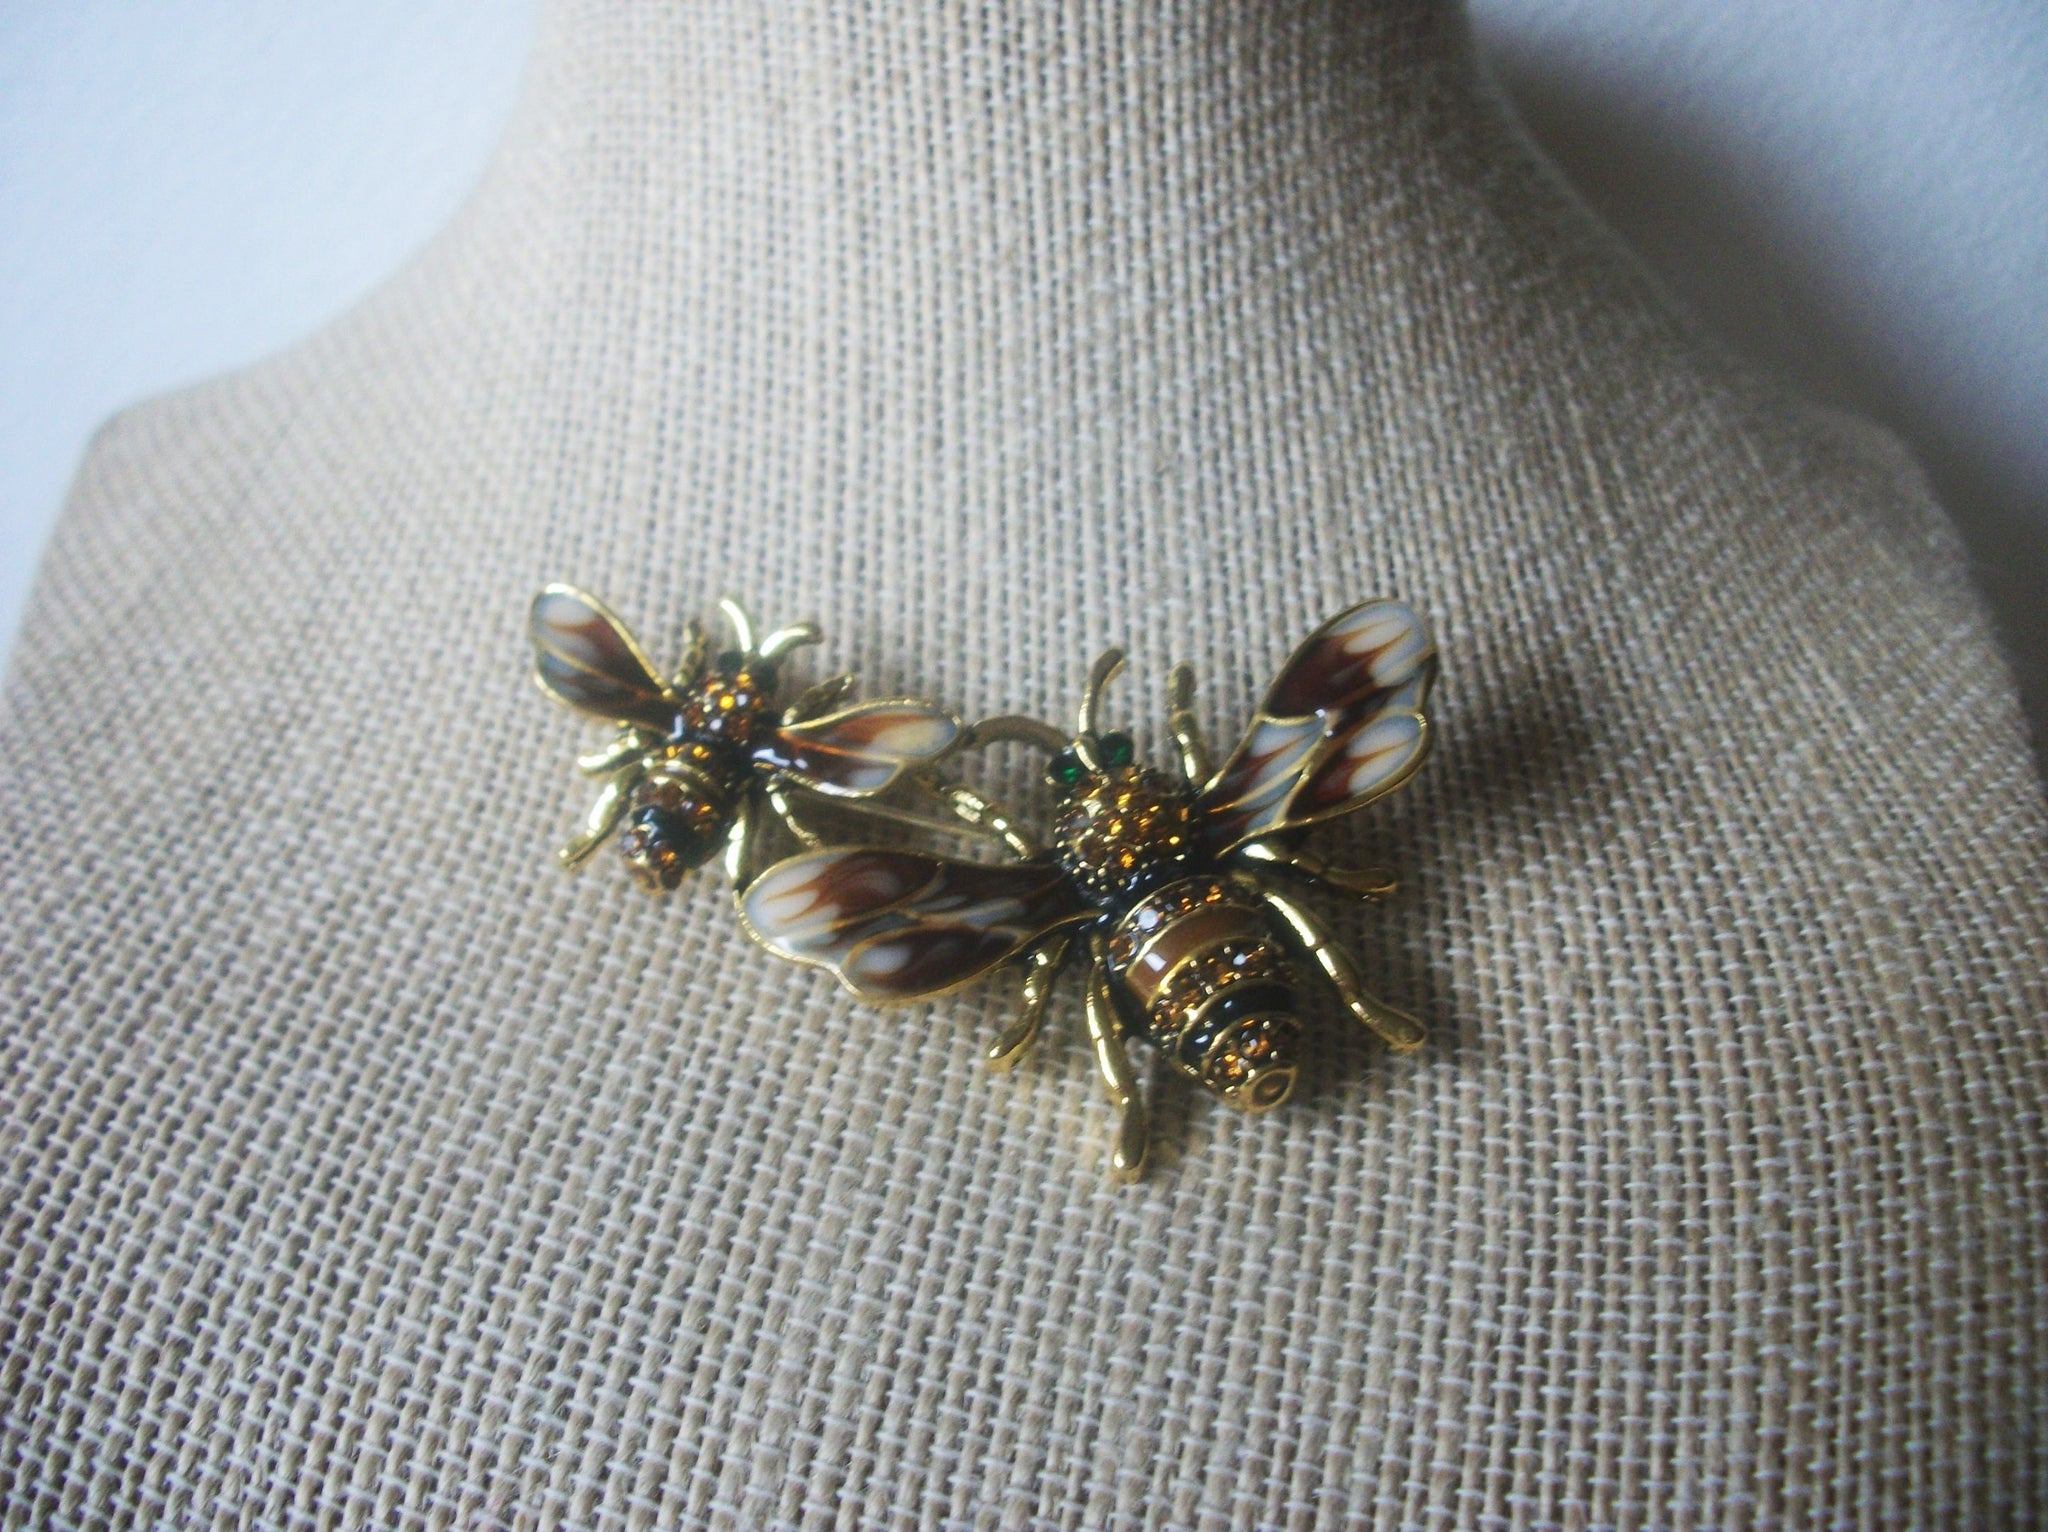 Vintage Jewelry, Two Bumble Honey Bees, Crystal Rhinestones, Enameled Wings, Gold Tone, Brooch Pin 022621